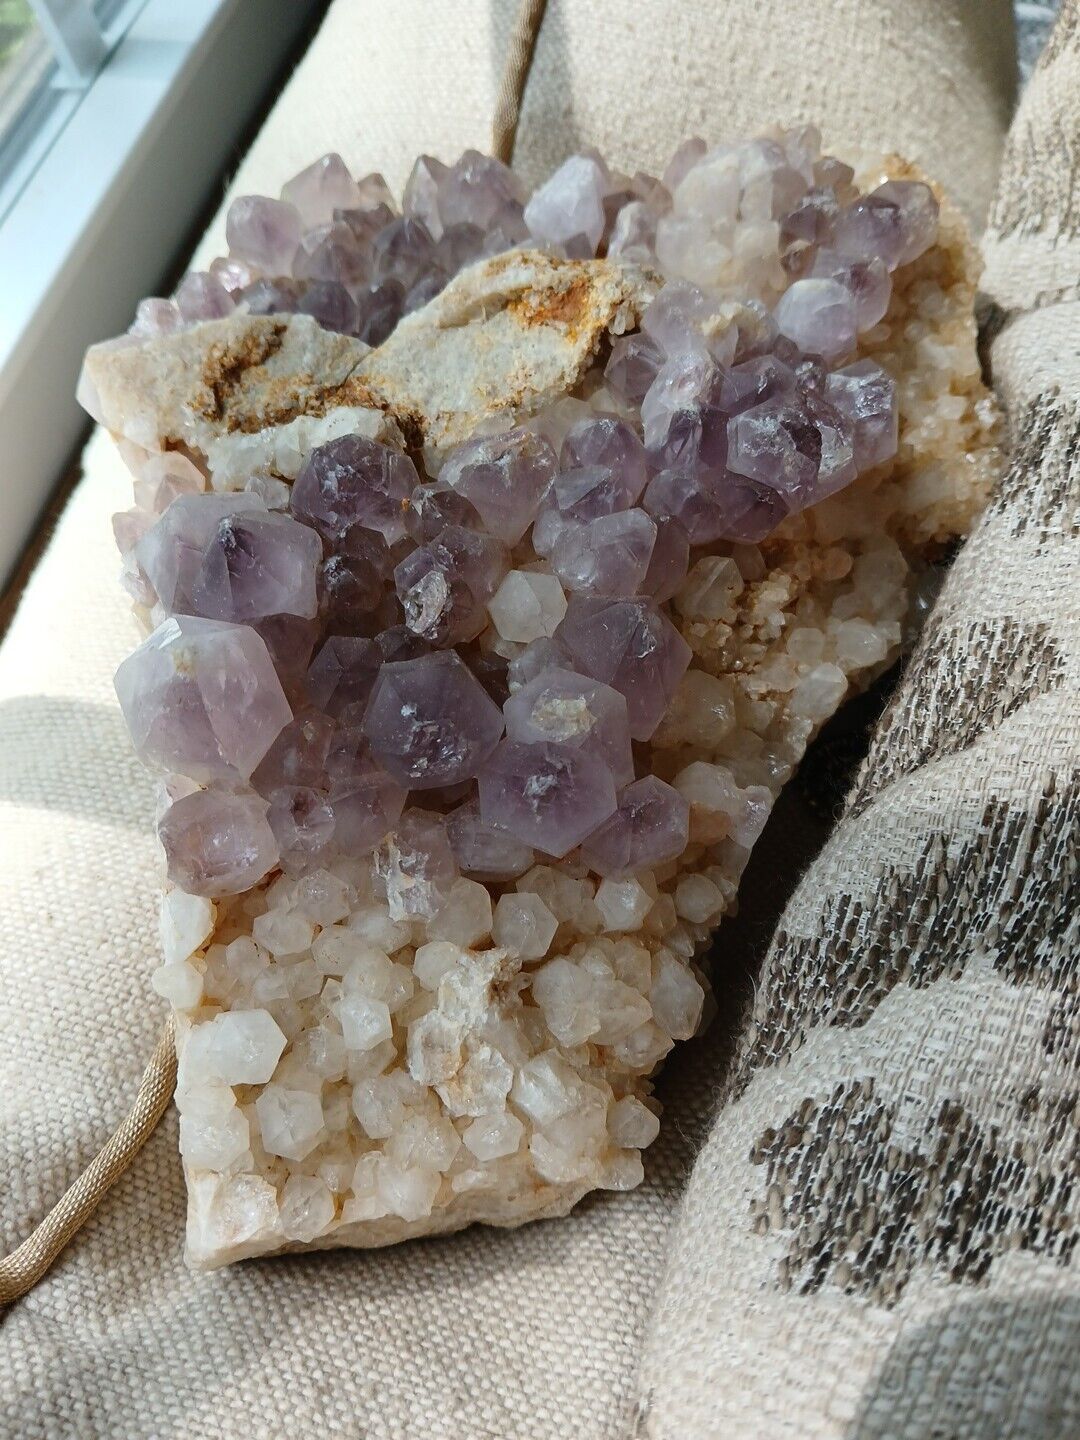 Cluster Of Purple Amethyst Display, 5.4 Lbs, Fantastic Find That Day..